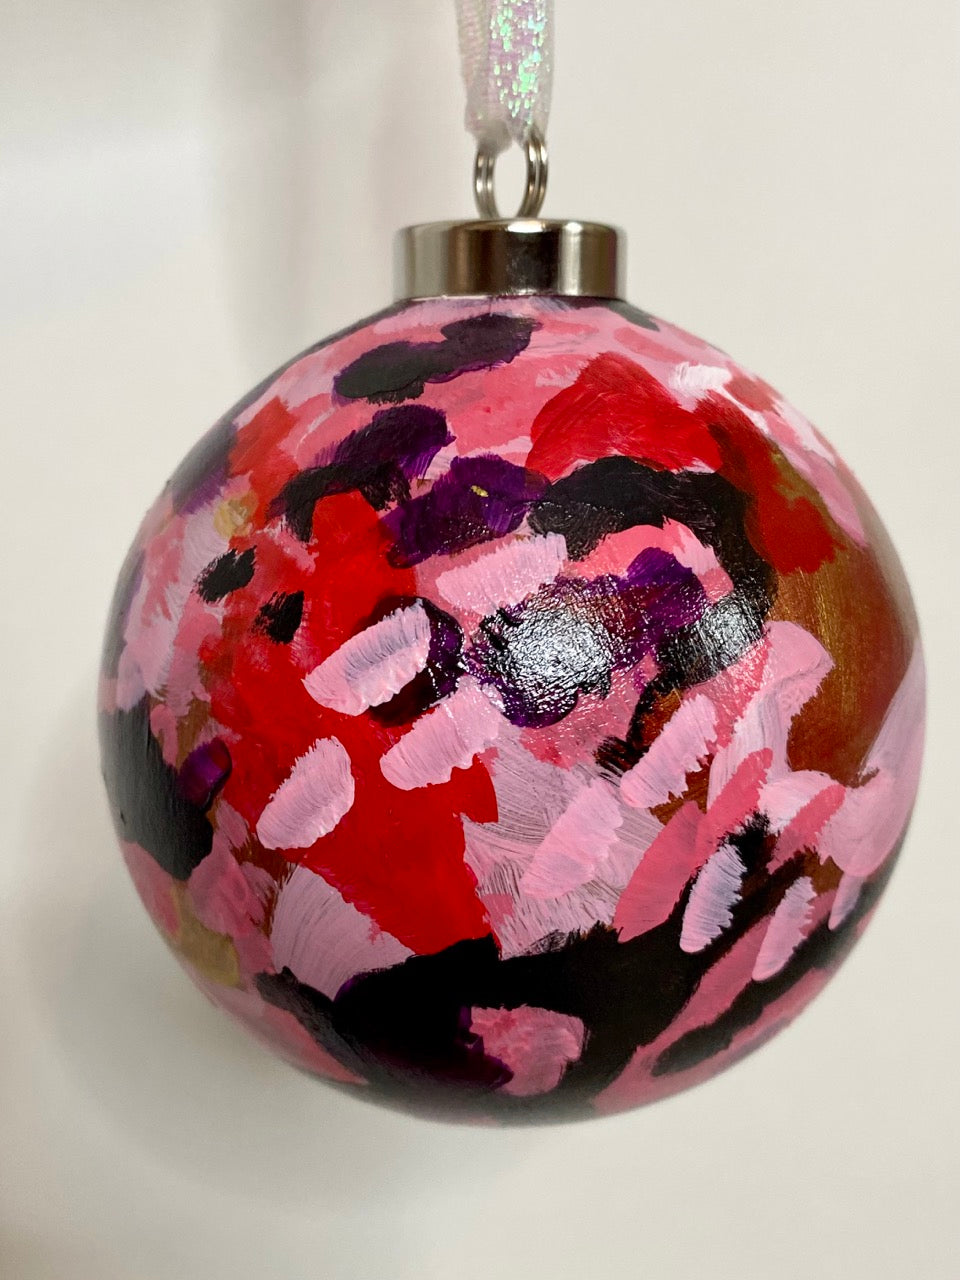 Cherry Blossom Hand Painted Ceramic Holiday Ornament